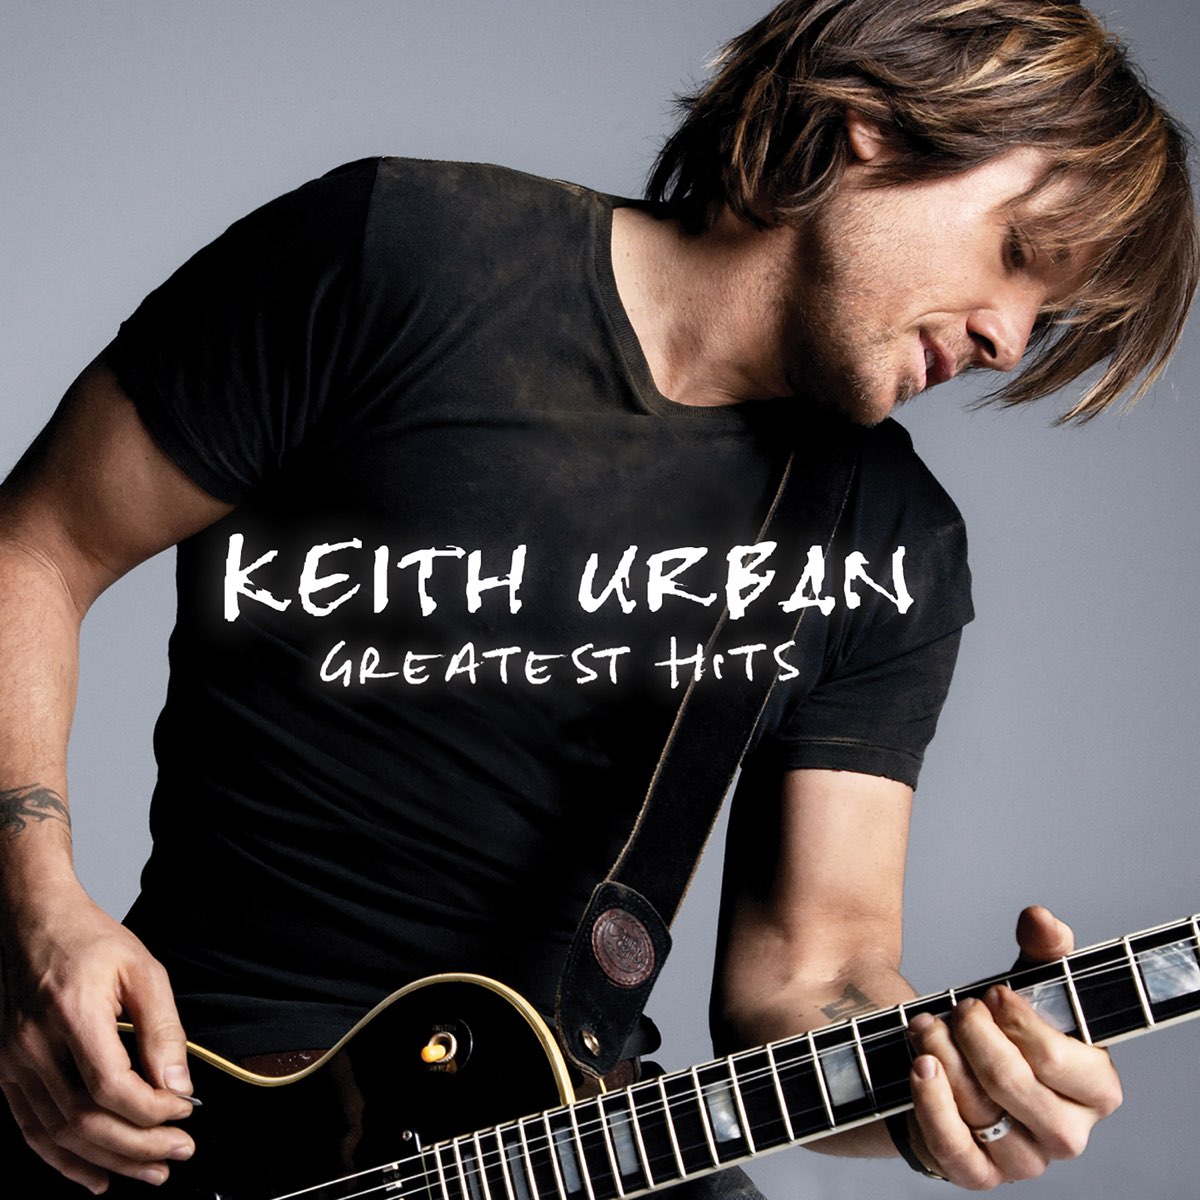 ‎Greatest Hits by Keith Urban on Apple Music